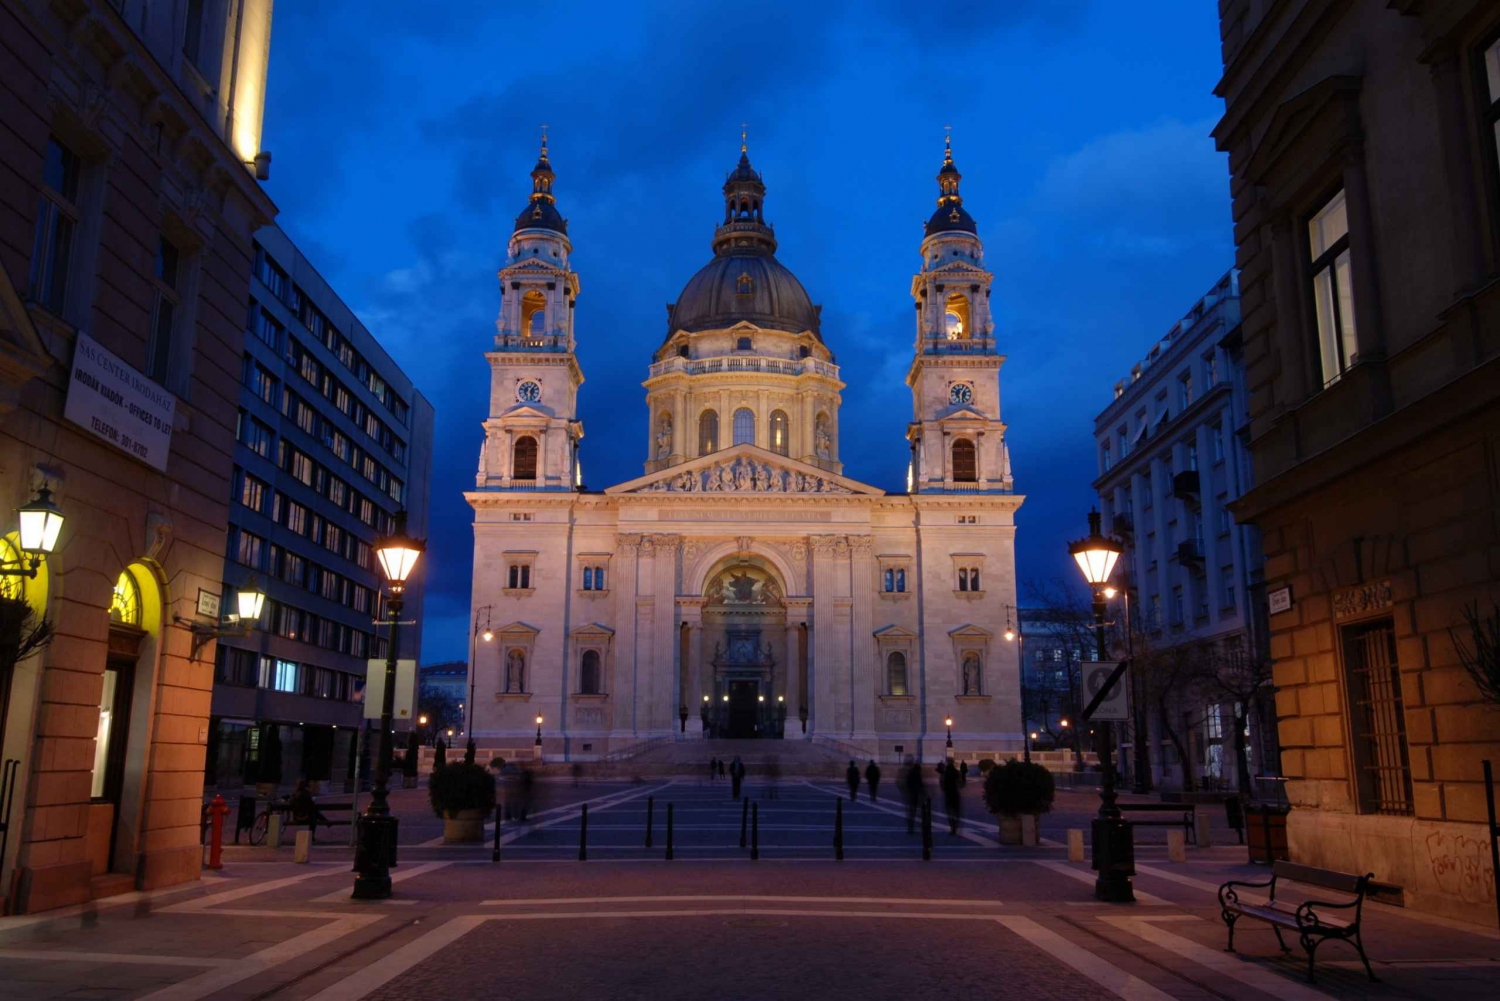 St. Stephen's Basilica: VIP Concert & After Hours Dome Visit